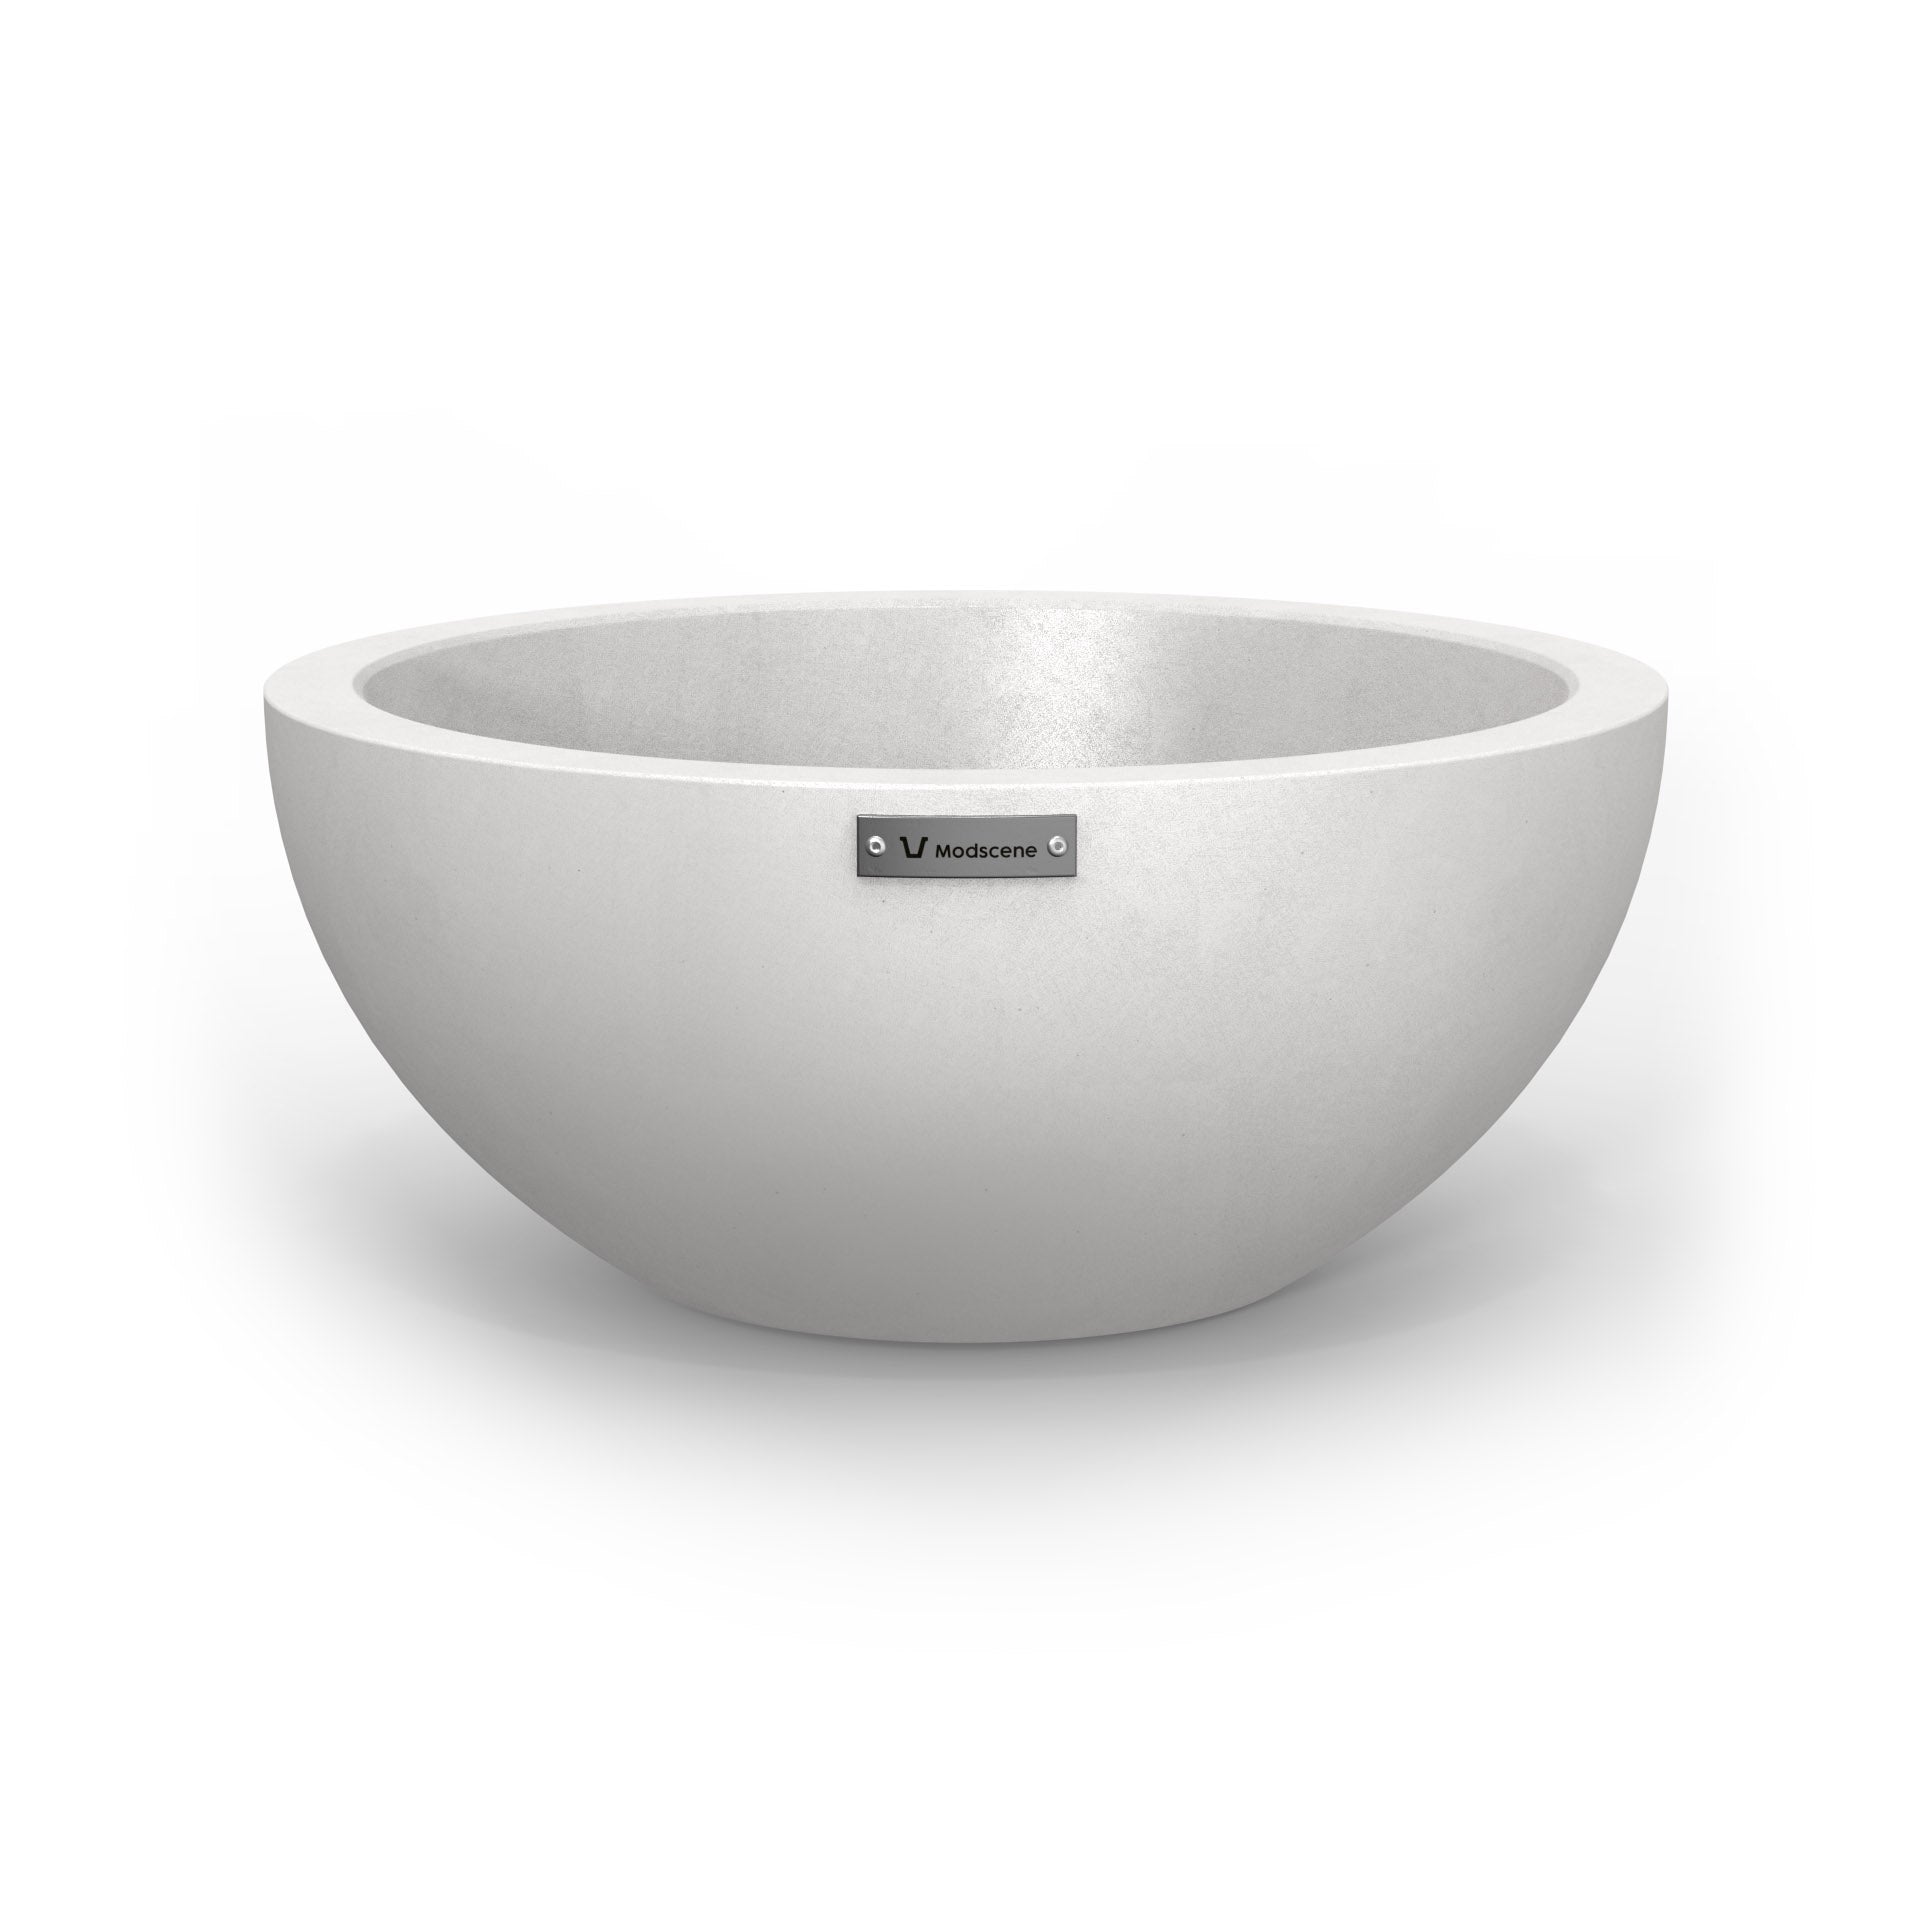 A small planter bowl in matte white made by Modscene.